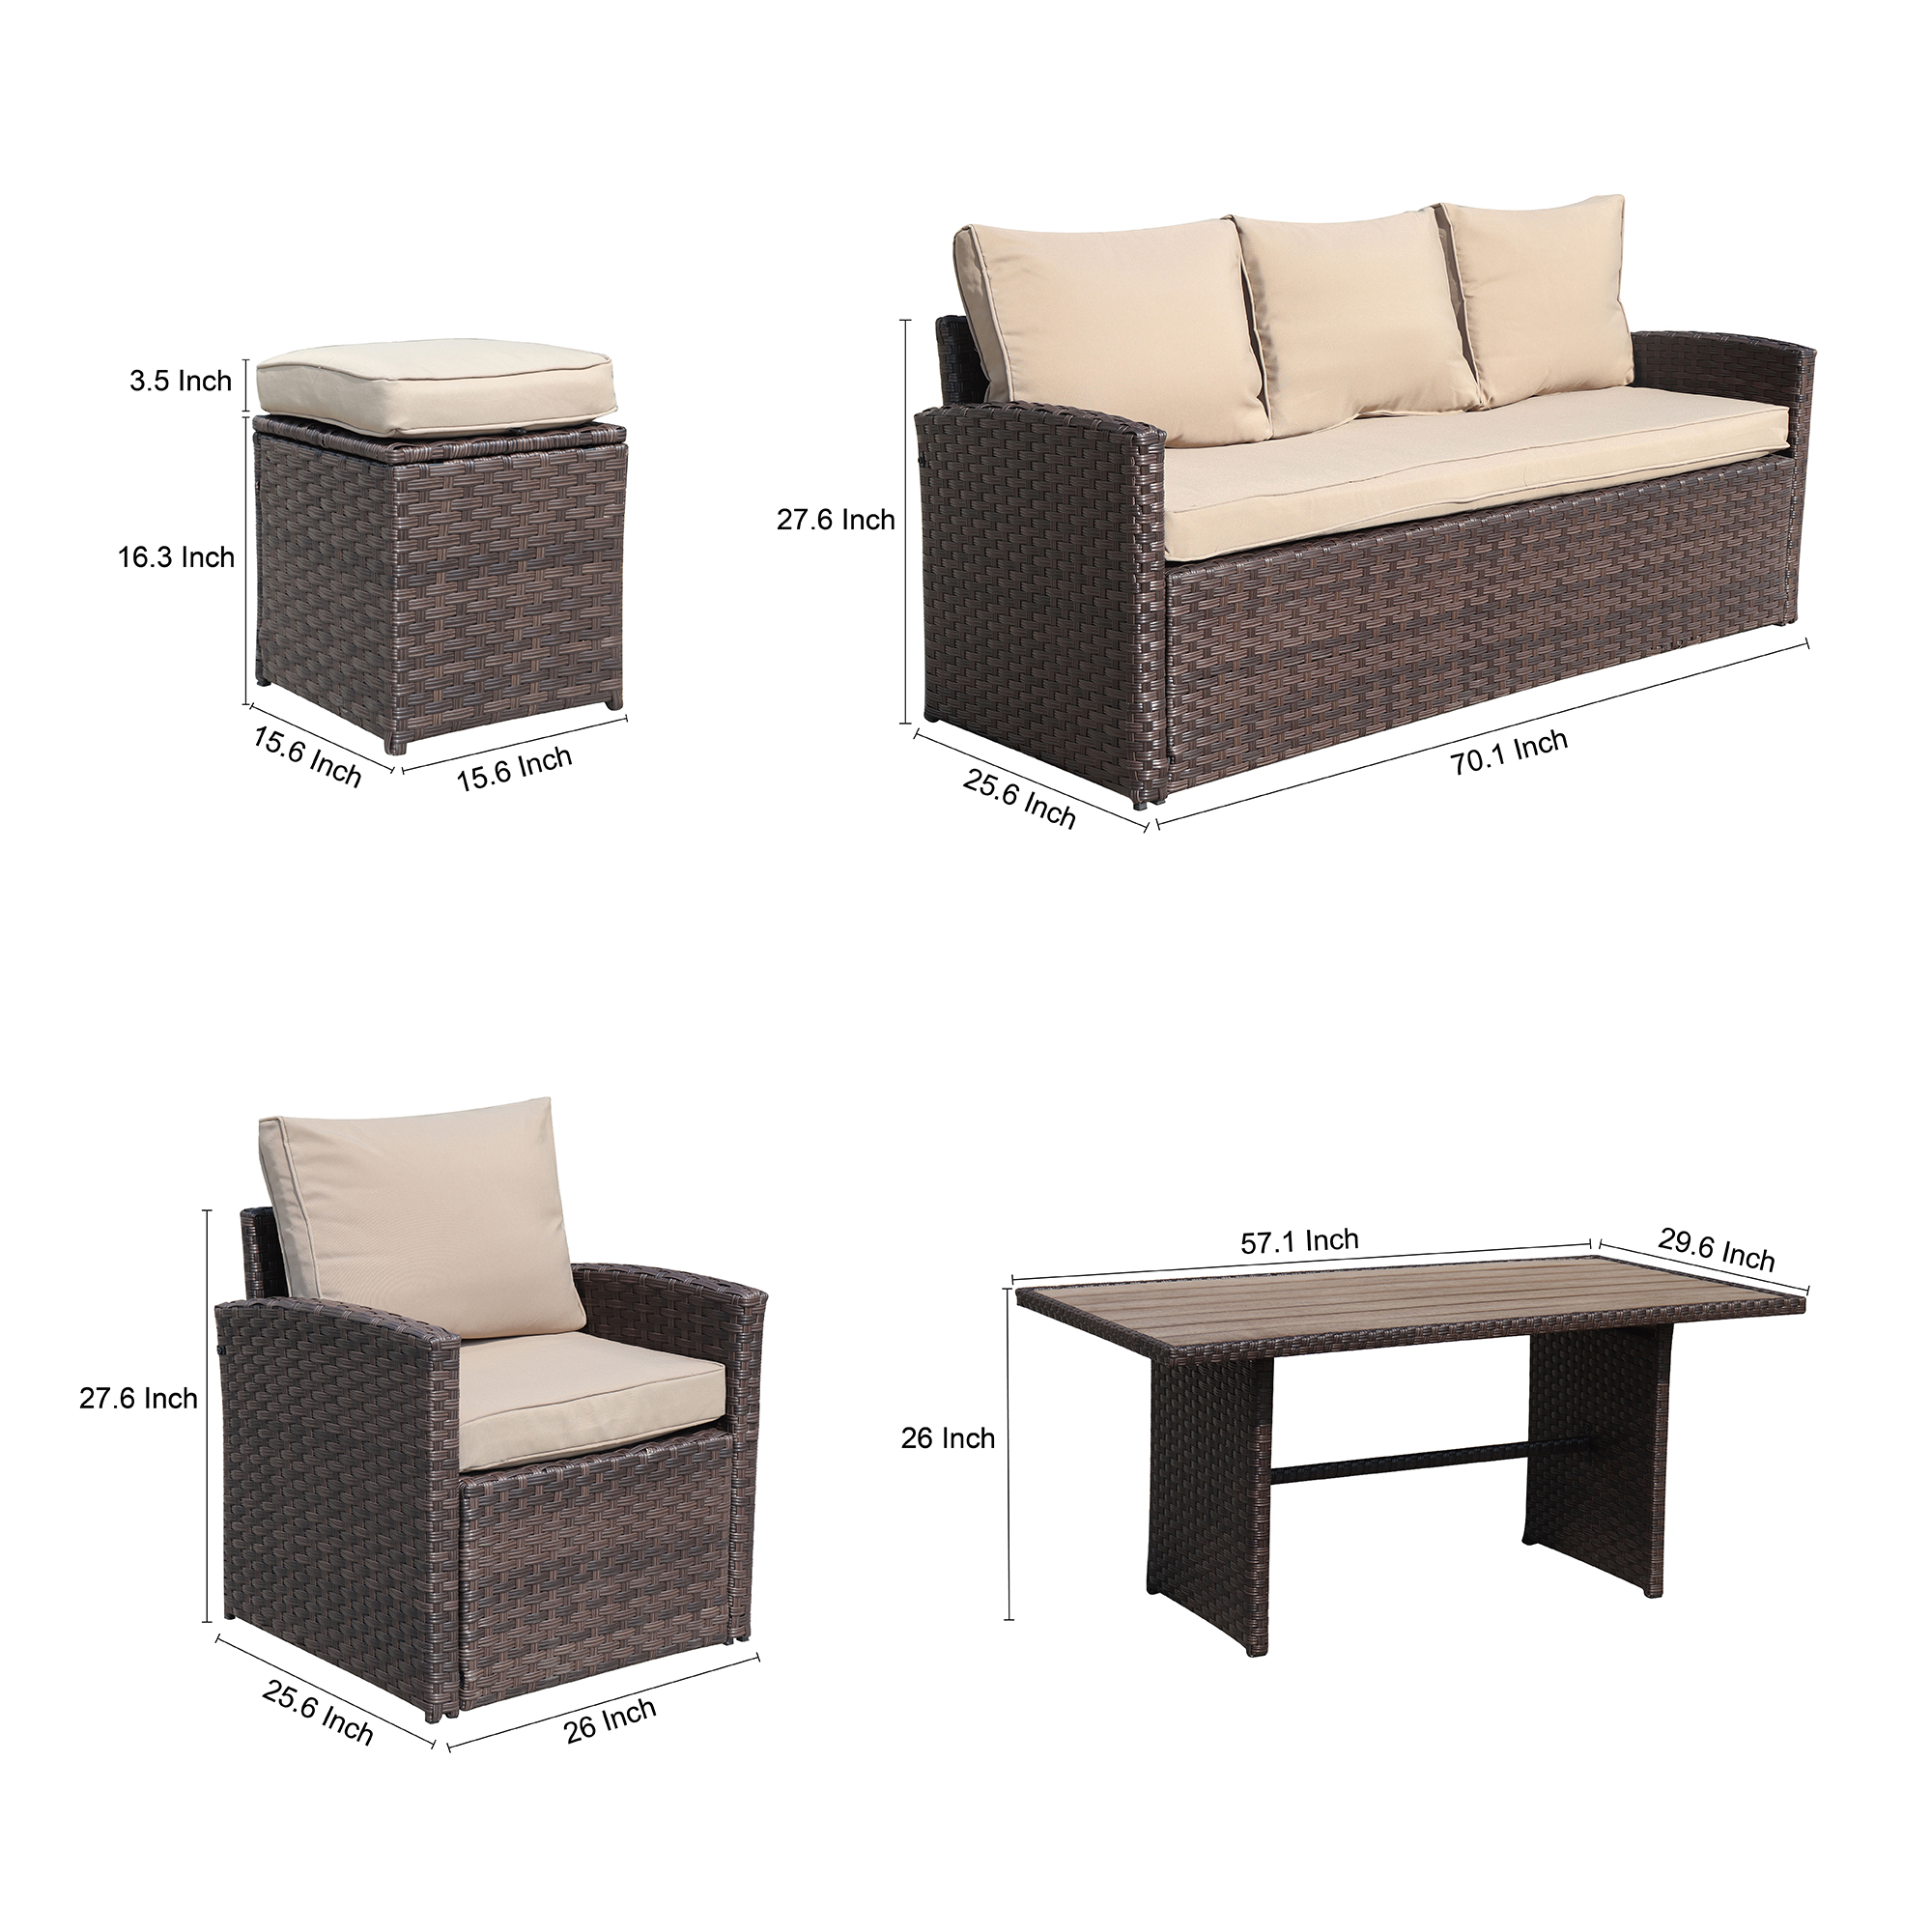 6 Piece Wicker Sectional Sofa Set, Outdoor Patio Furniture, All-Weather Rattan Garden Conversation Furniture Set, Cushioned Dining Table Set with Ottomans & Table for Patio Deck Backyard, B841 - image 3 of 9